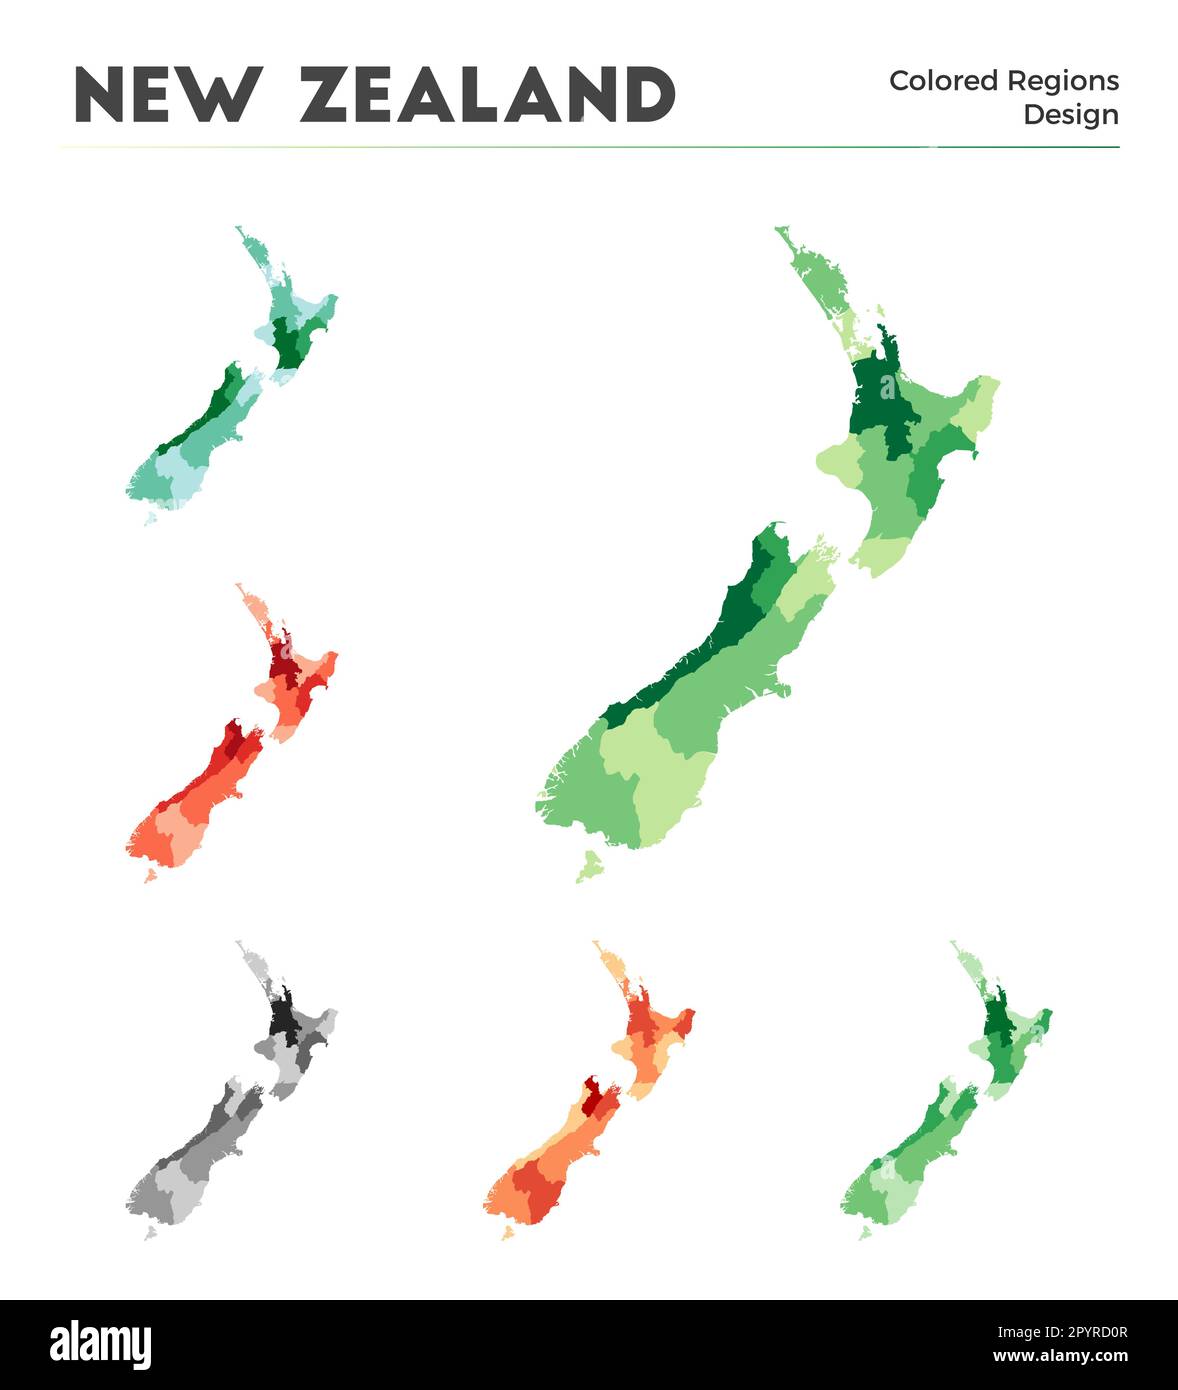 New Zealand map collection. Borders of New Zealand for your infographic. Colored country regions. Vector illustration. Stock Vector